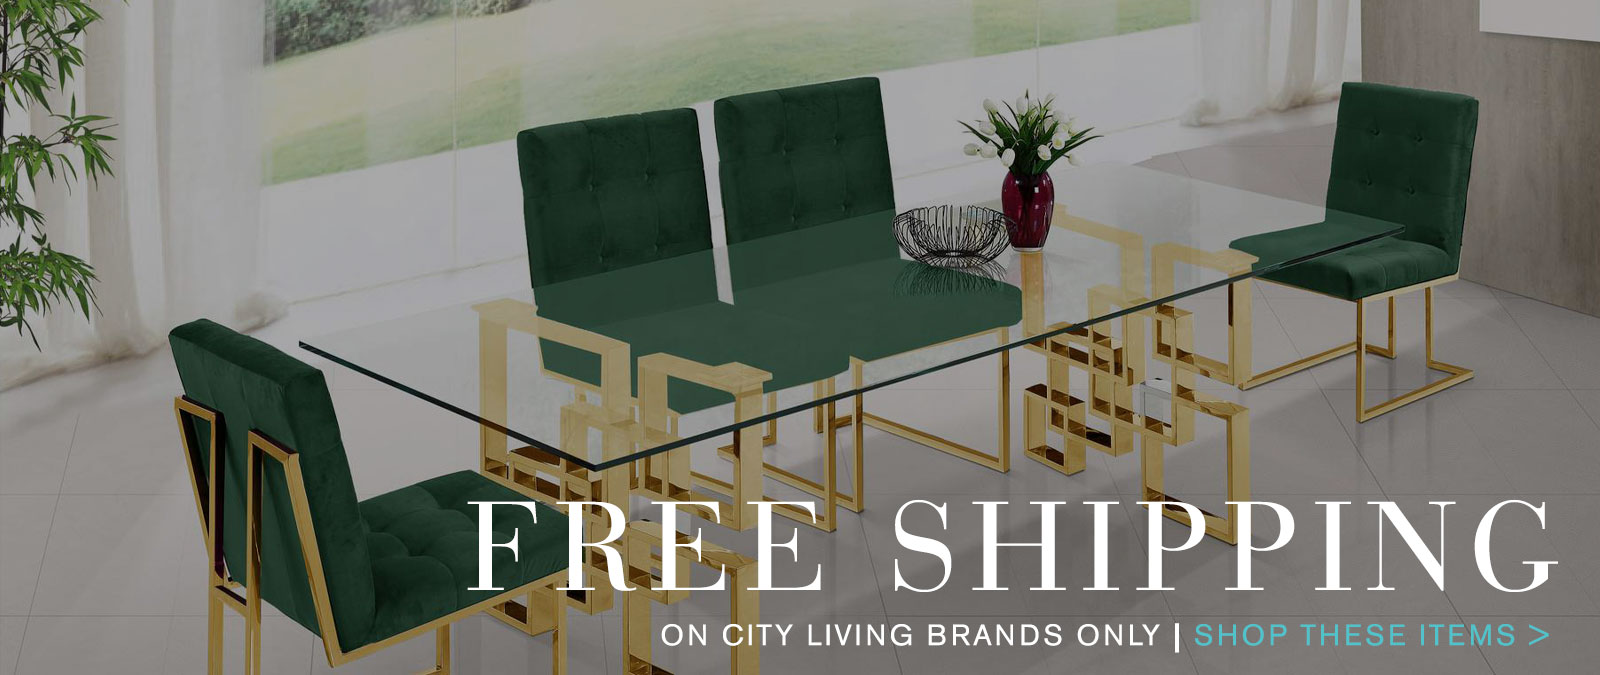 Free Shipping On City Living Brands only | Shop these items>